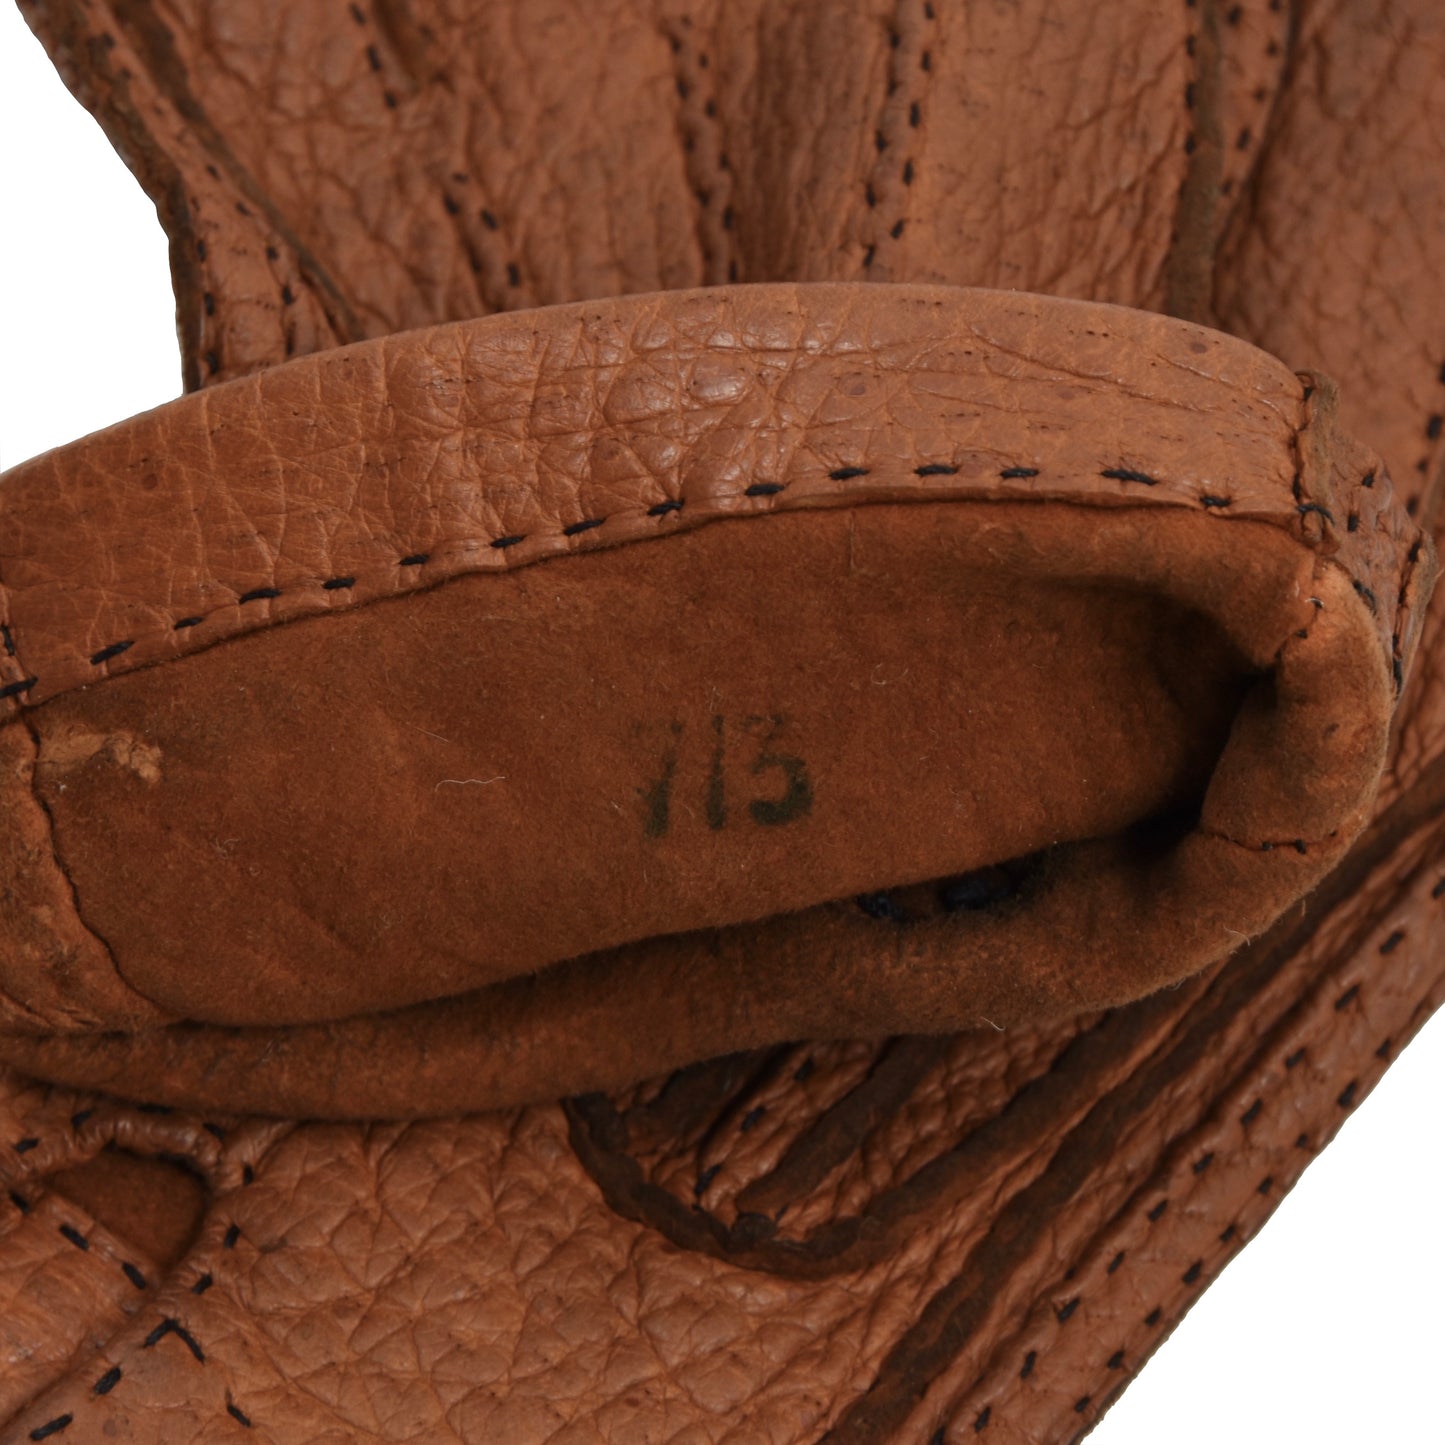 Unlined Peccary Gloves  - Rust Brown